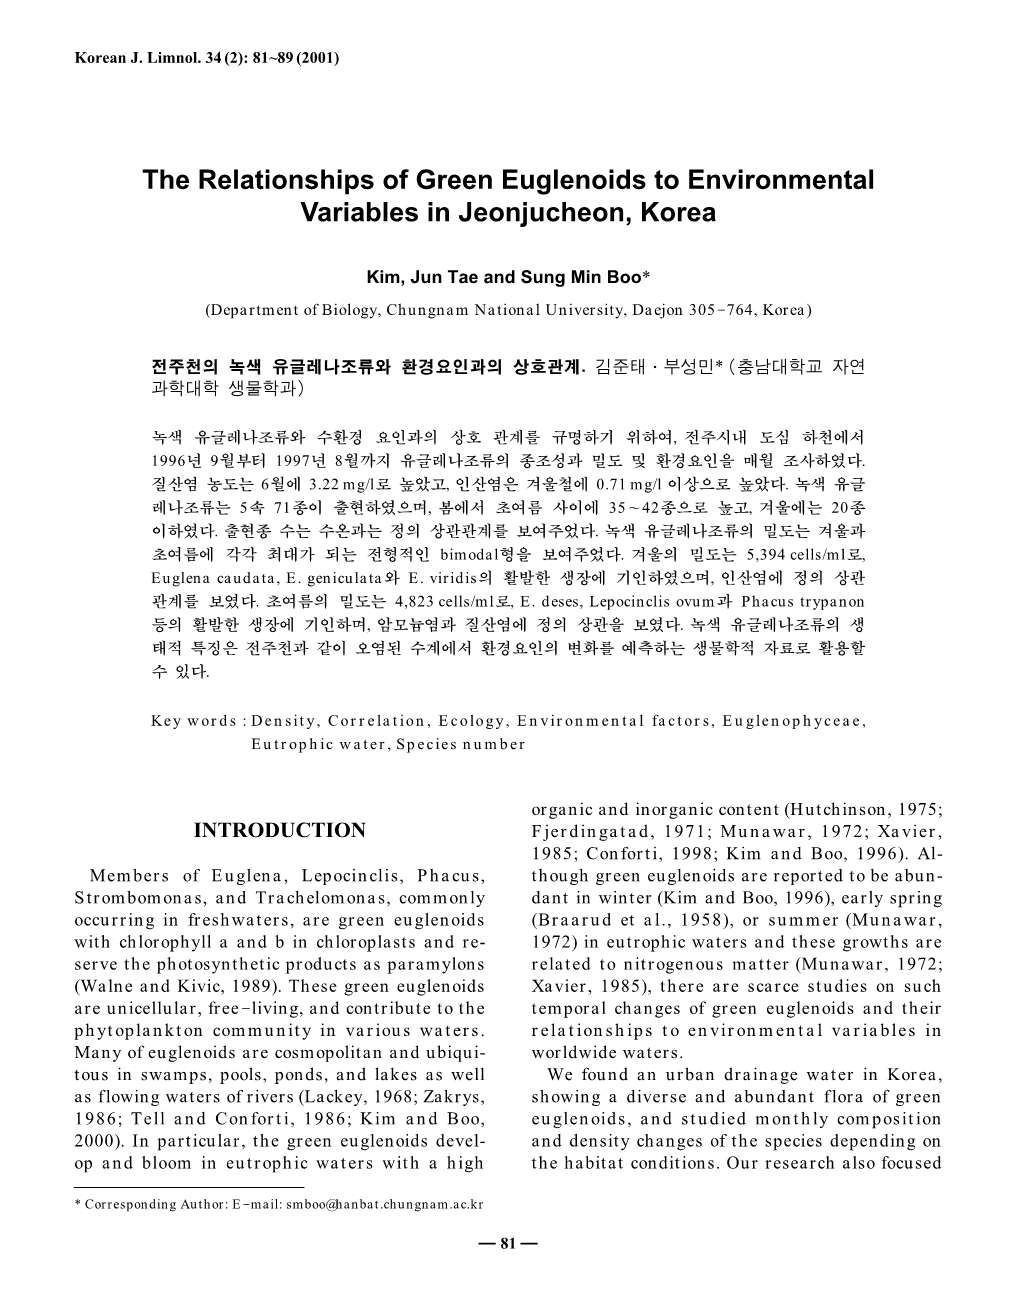 The Relationships of Green Euglenoids to Environmental Variables in Jeonjucheon, Korea